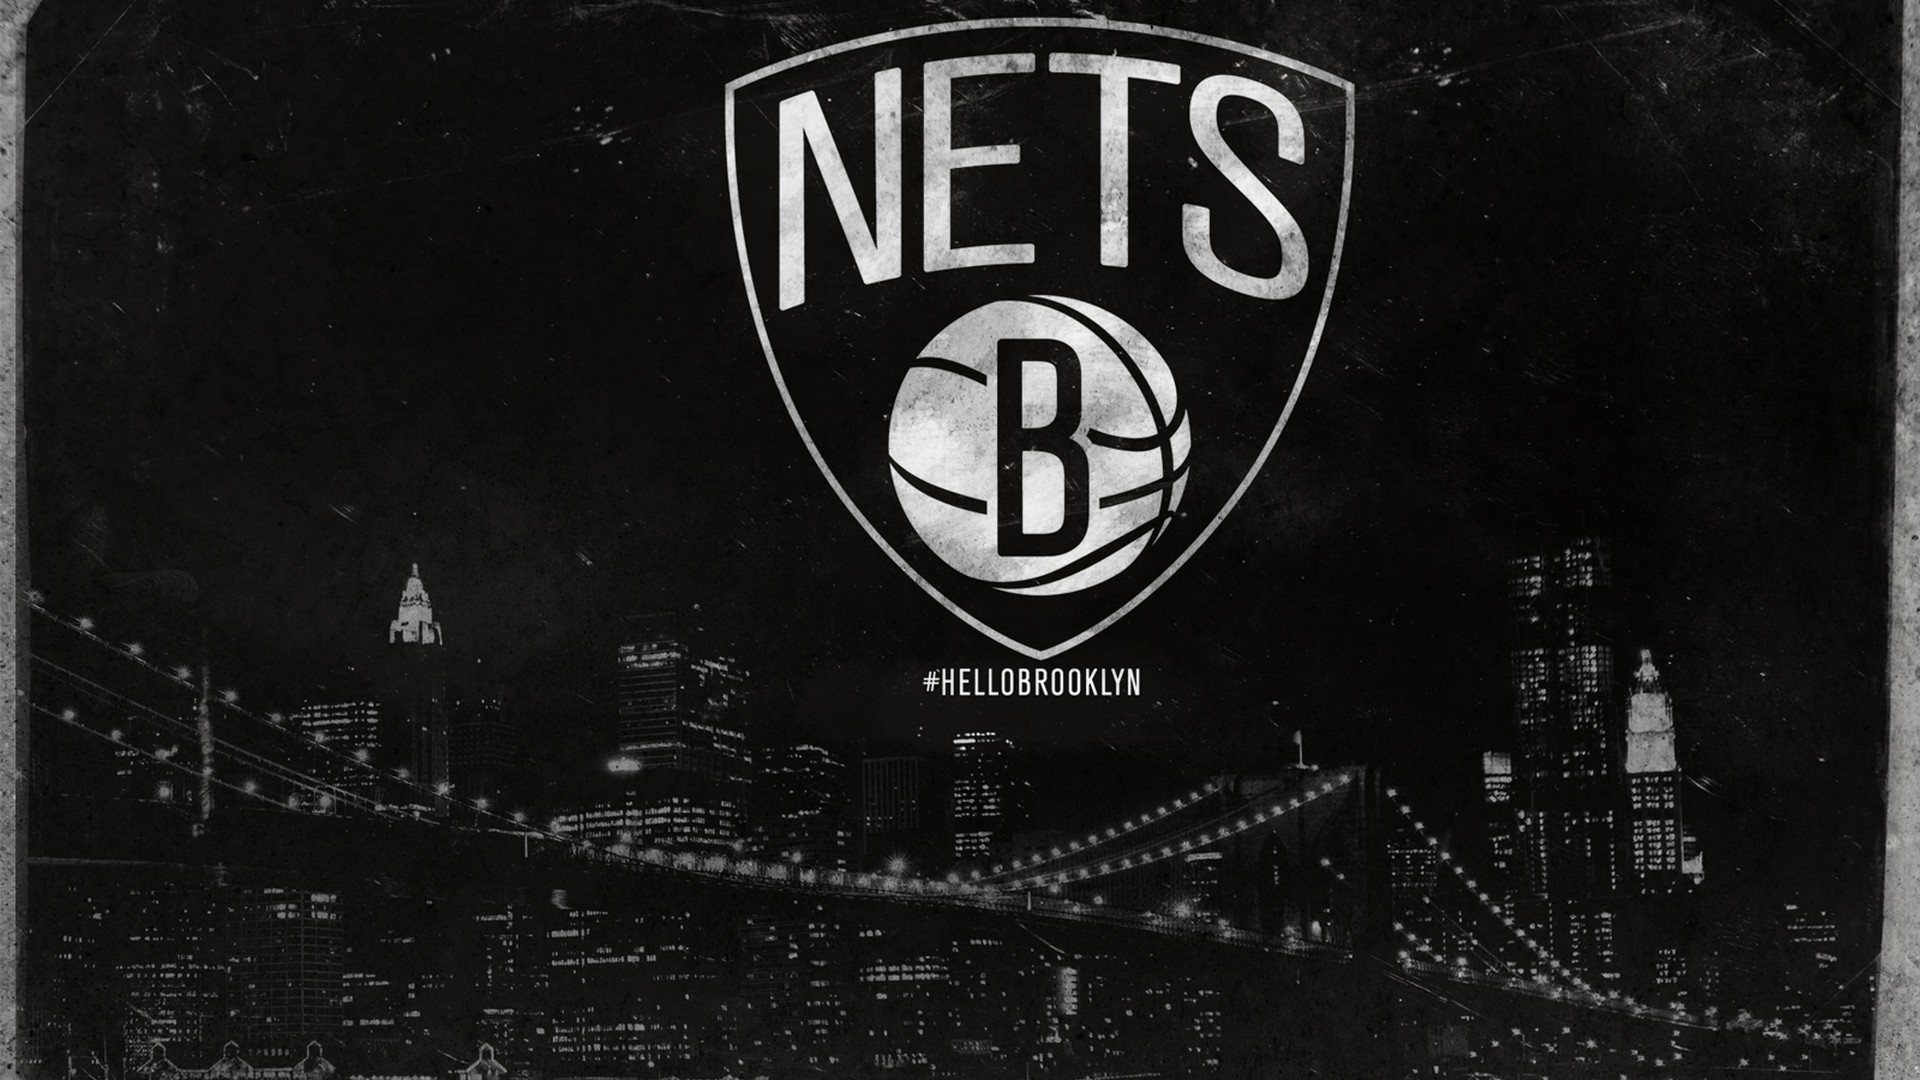 Wallpapers Brooklyn Nets with image dimensions 1920x1080 pixel. You can make this wallpaper for your Desktop Computer Backgrounds, Windows or Mac Screensavers, iPhone Lock screen, Tablet or Android and another Mobile Phone device